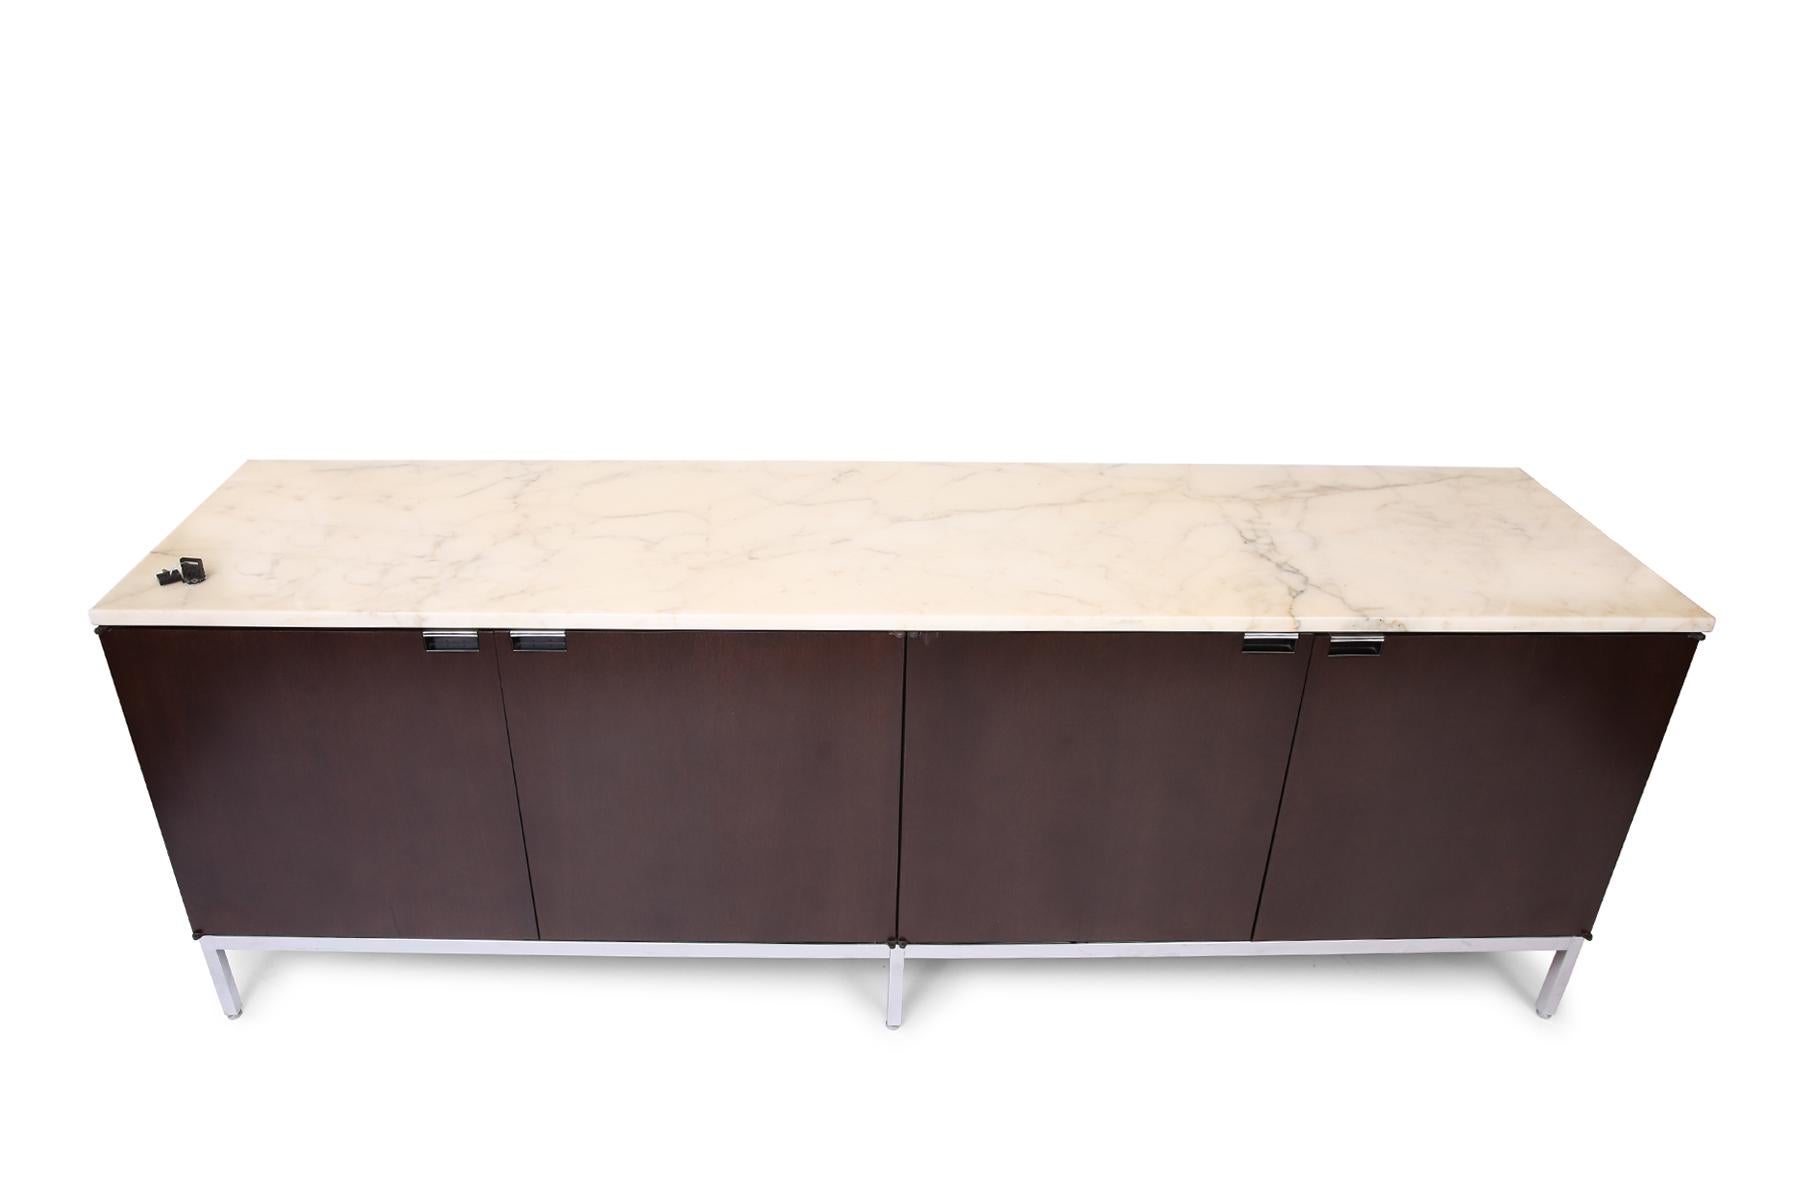 Stunning Florence Knoll designed credenza with original Italian white Calacatta marble top, including rare top locking mechanism. Four dark mahogany finished doors open to reveal a total of eight oak shelves. Finished with polished chrome-finished